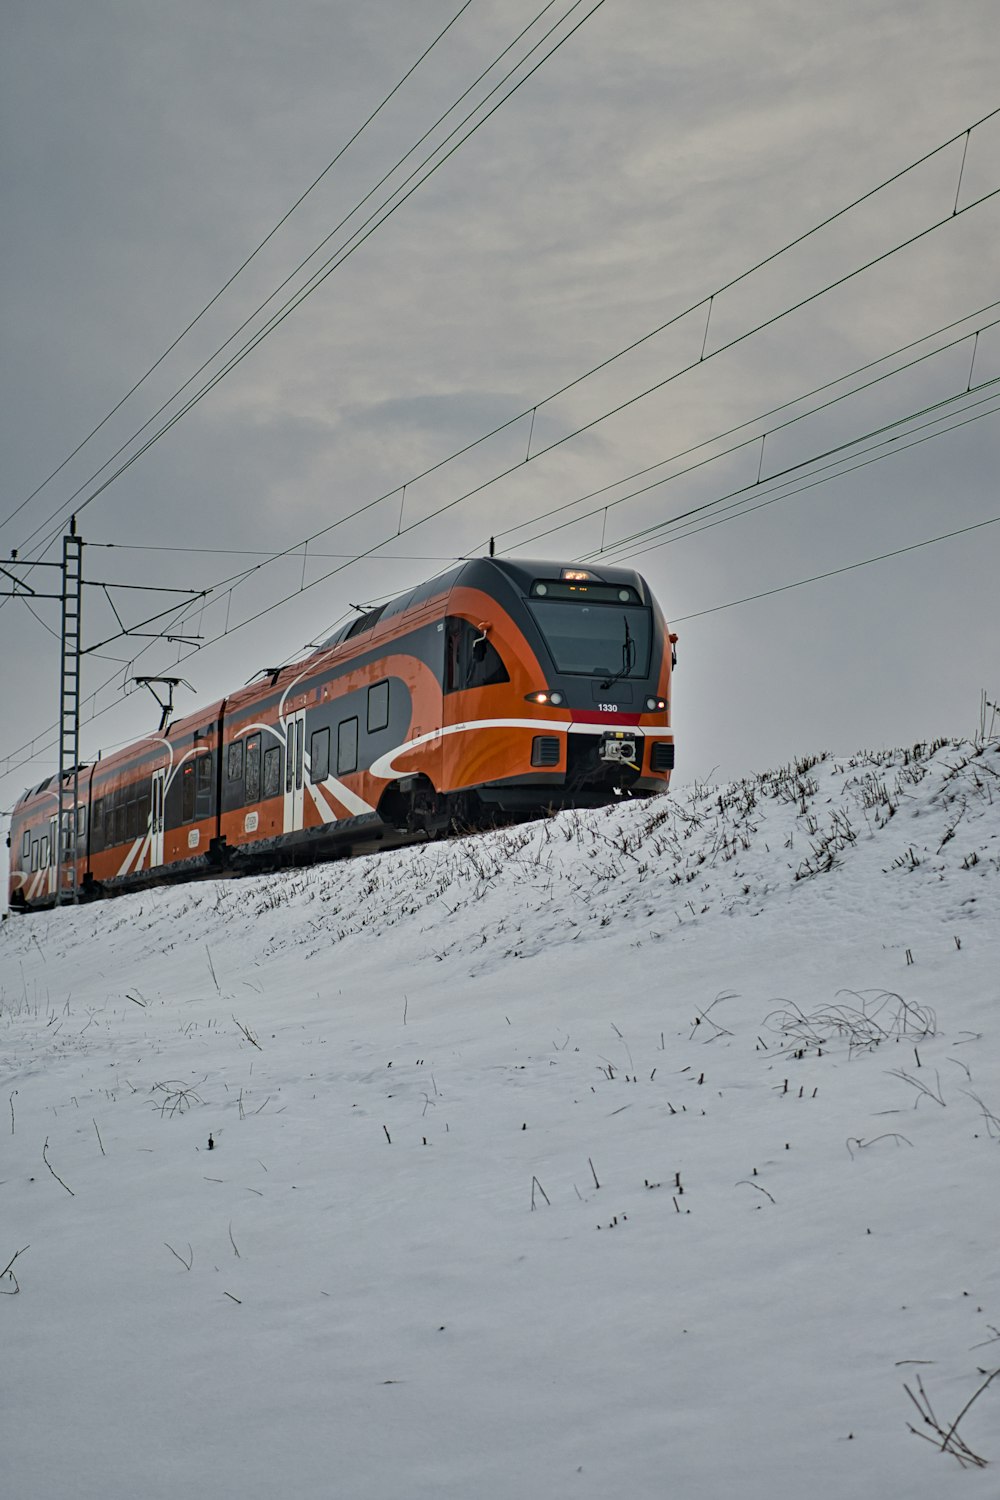 orange and black train on snow covered ground during daytime